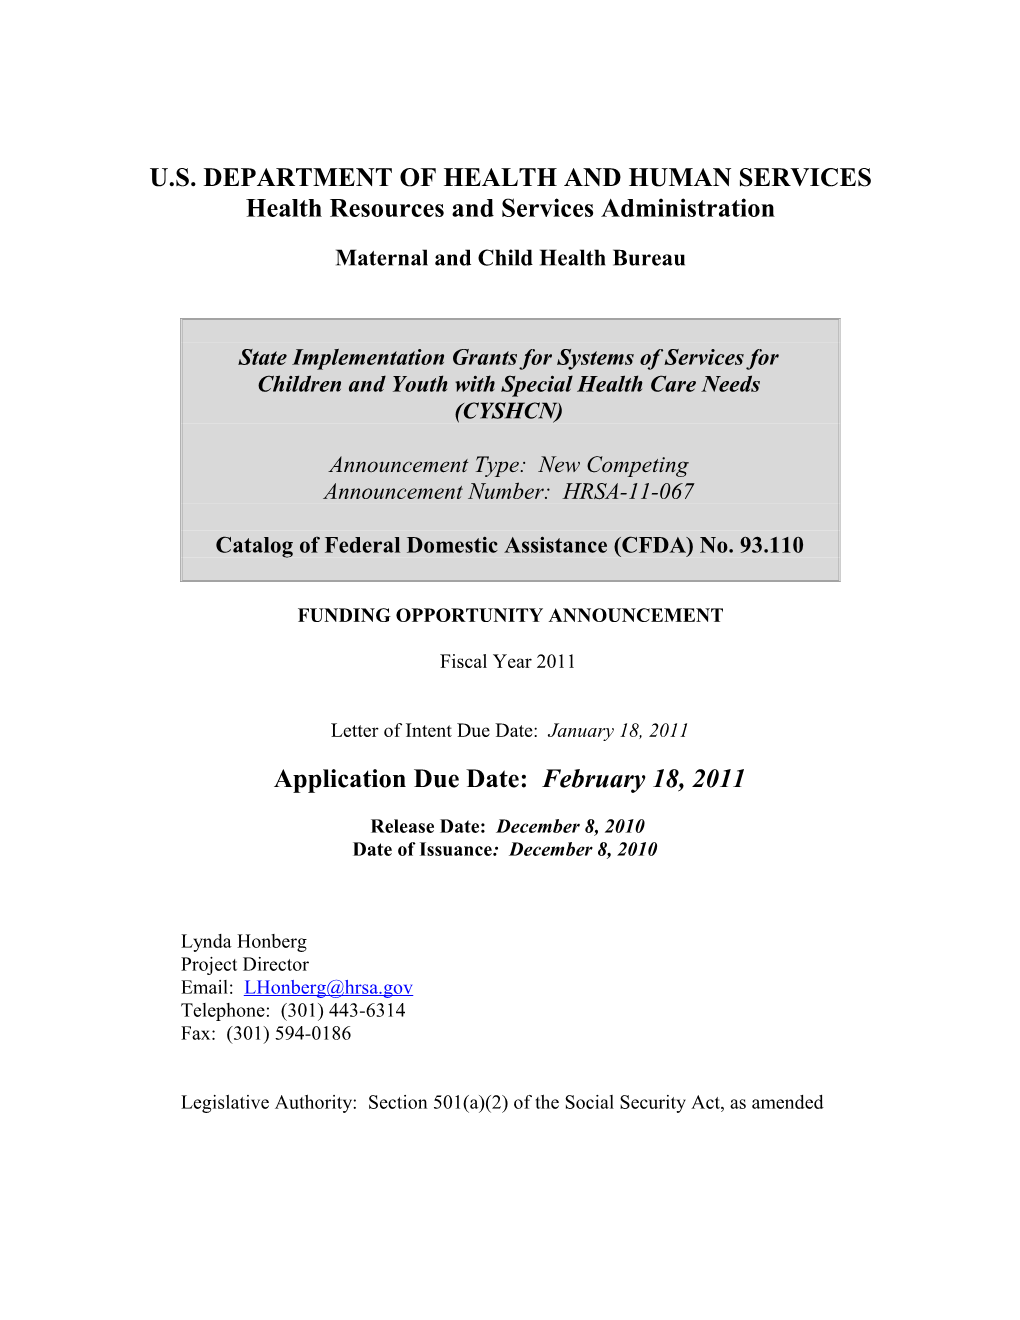 U.S. Department of Health and Human Services s1